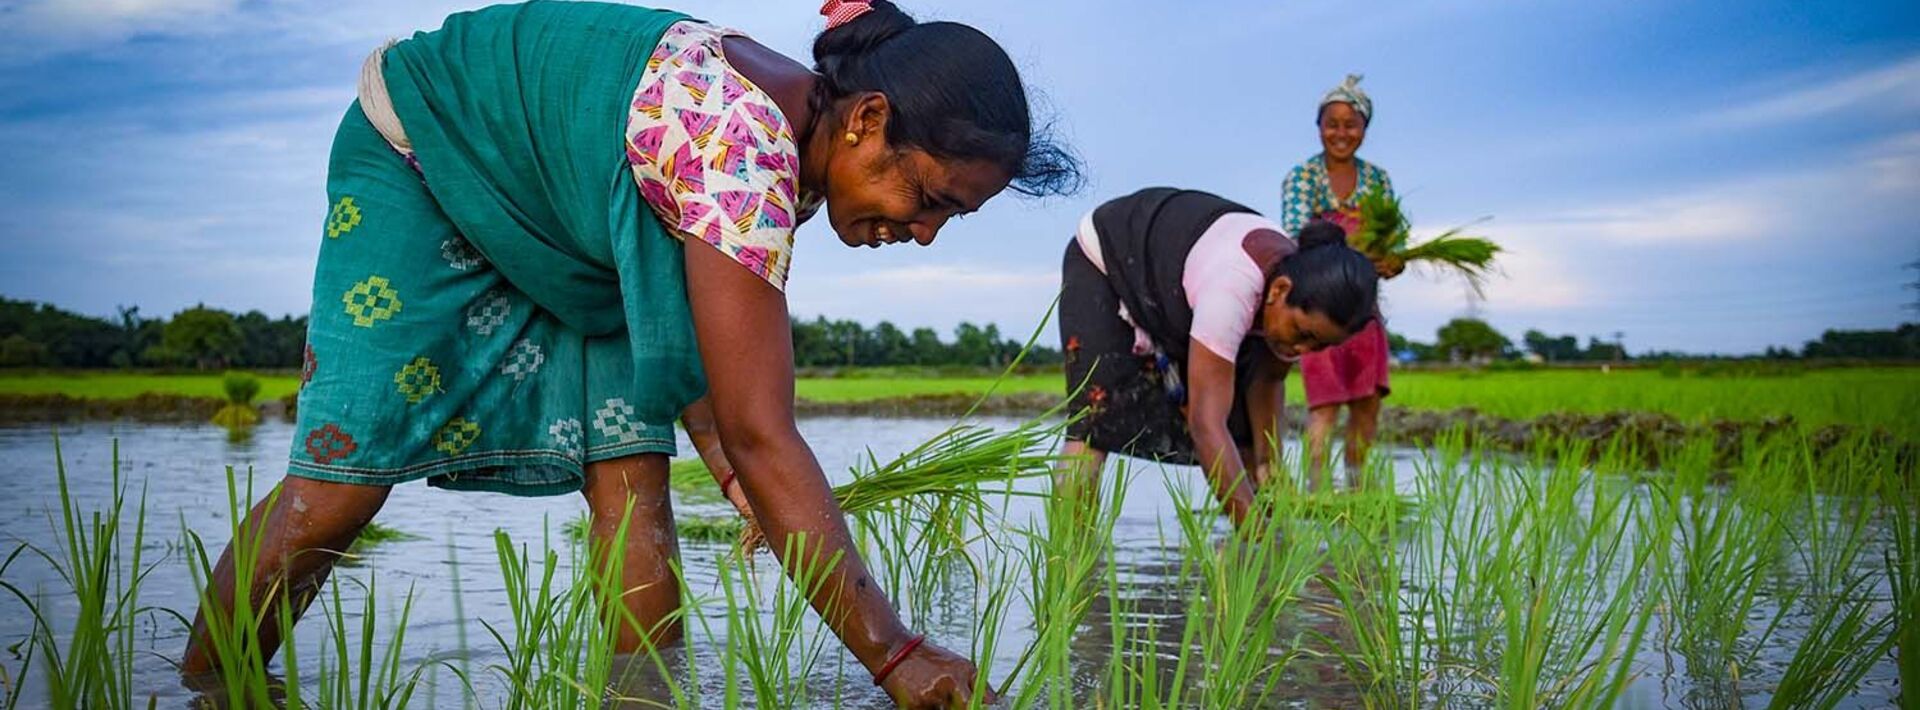 a woman bending over in a marsh area grabbing something from the water, she is up to her ankles and wearing a brightly colored traditional outfit in blue, green, white and purple